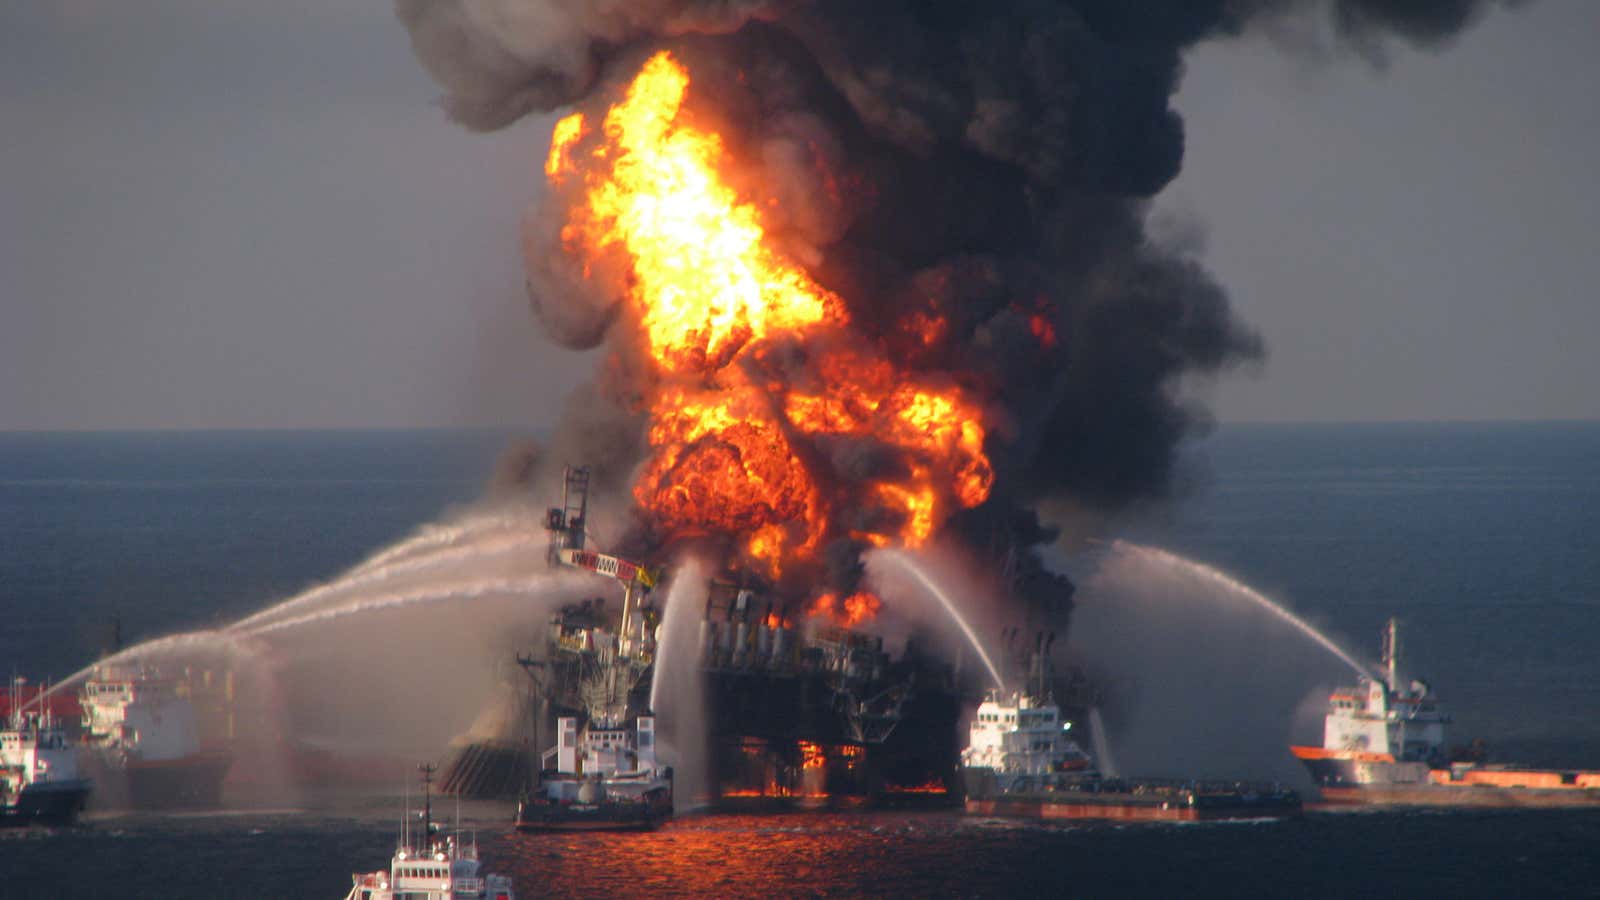 Two BP officials will face charges of manslaughter for the 11 deaths on the rig Deepwater Horizon in 2010.